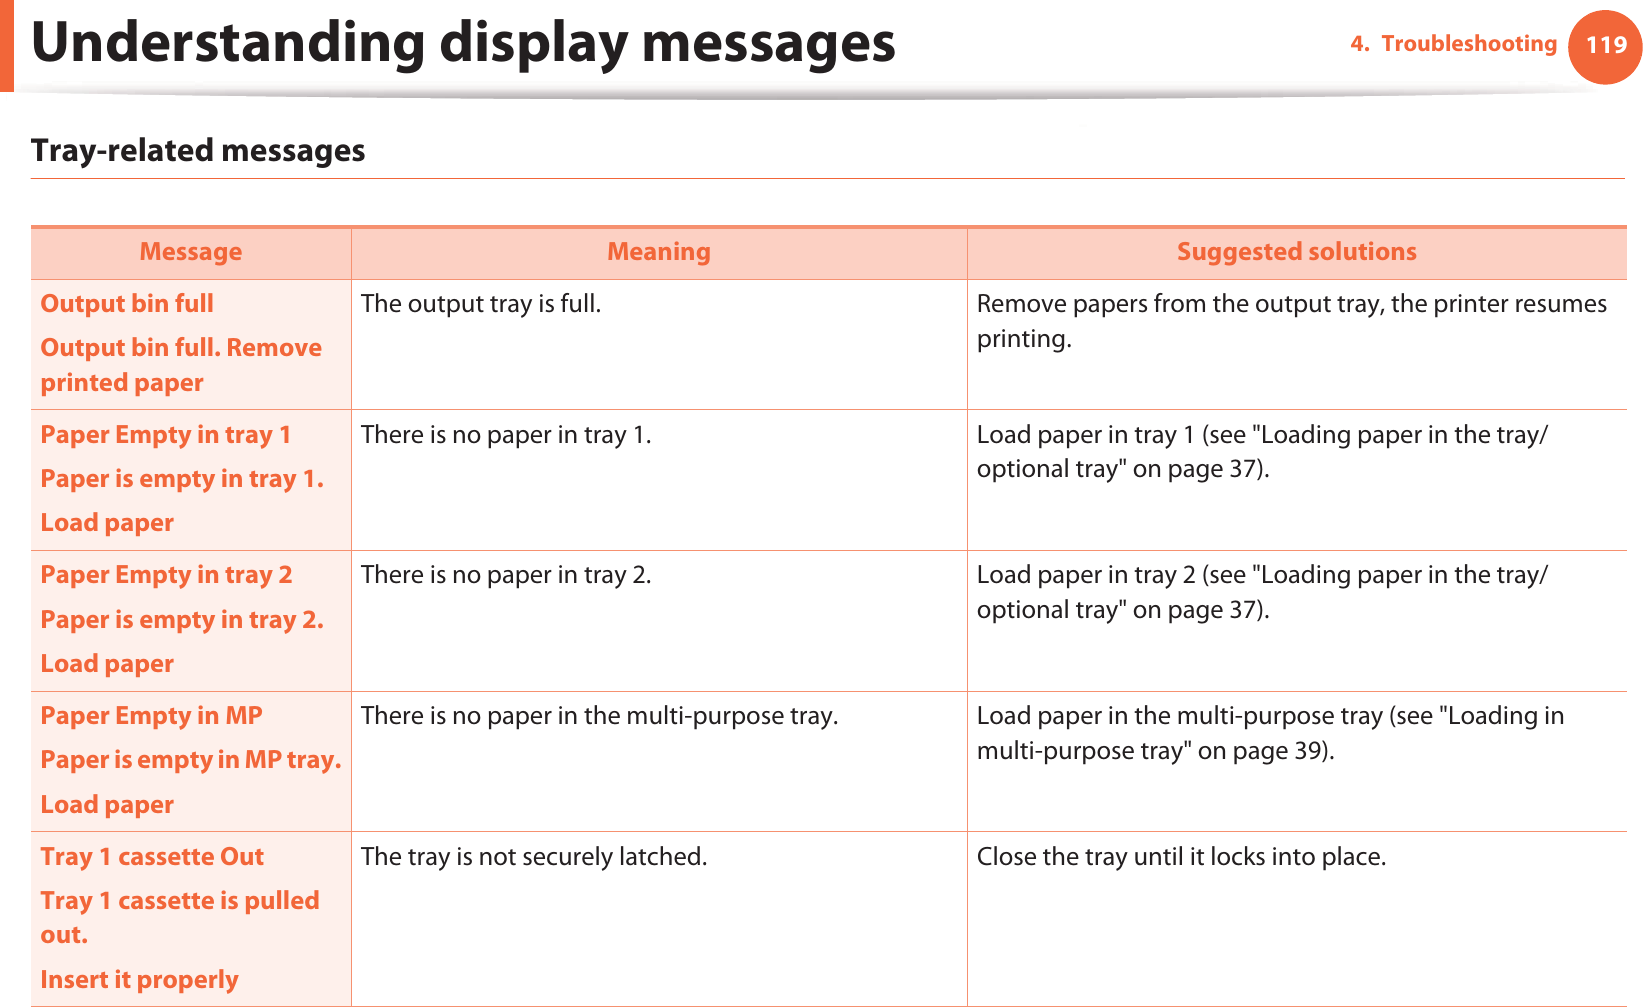 Understanding display messages 1194. TroubleshootingTray-related messagesMessage Meaning Suggested solutionsOutput bin fullOutput bin full. Remove printed paperThe output tray is full.  Remove papers from the output tray, the printer resumes printing. Paper Empty in tray 1Paper is empty in tray 1.Load paperThere is no paper in tray 1.  Load paper in tray 1 (see &quot;Loading paper in the tray/ optional tray&quot; on page 37).Paper Empty in tray 2Paper is empty in tray 2.Load paperThere is no paper in tray 2.  Load paper in tray 2 (see &quot;Loading paper in the tray/ optional tray&quot; on page 37).Paper Empty in MPPaper is empty in MP tray.Load paperThere is no paper in the multi-purpose tray.  Load paper in the multi-purpose tray (see &quot;Loading in multi-purpose tray&quot; on page 39).Tray 1 cassette OutTray 1 cassette is pulled out.Insert it properlyThe tray is not securely latched.  Close the tray until it locks into place.